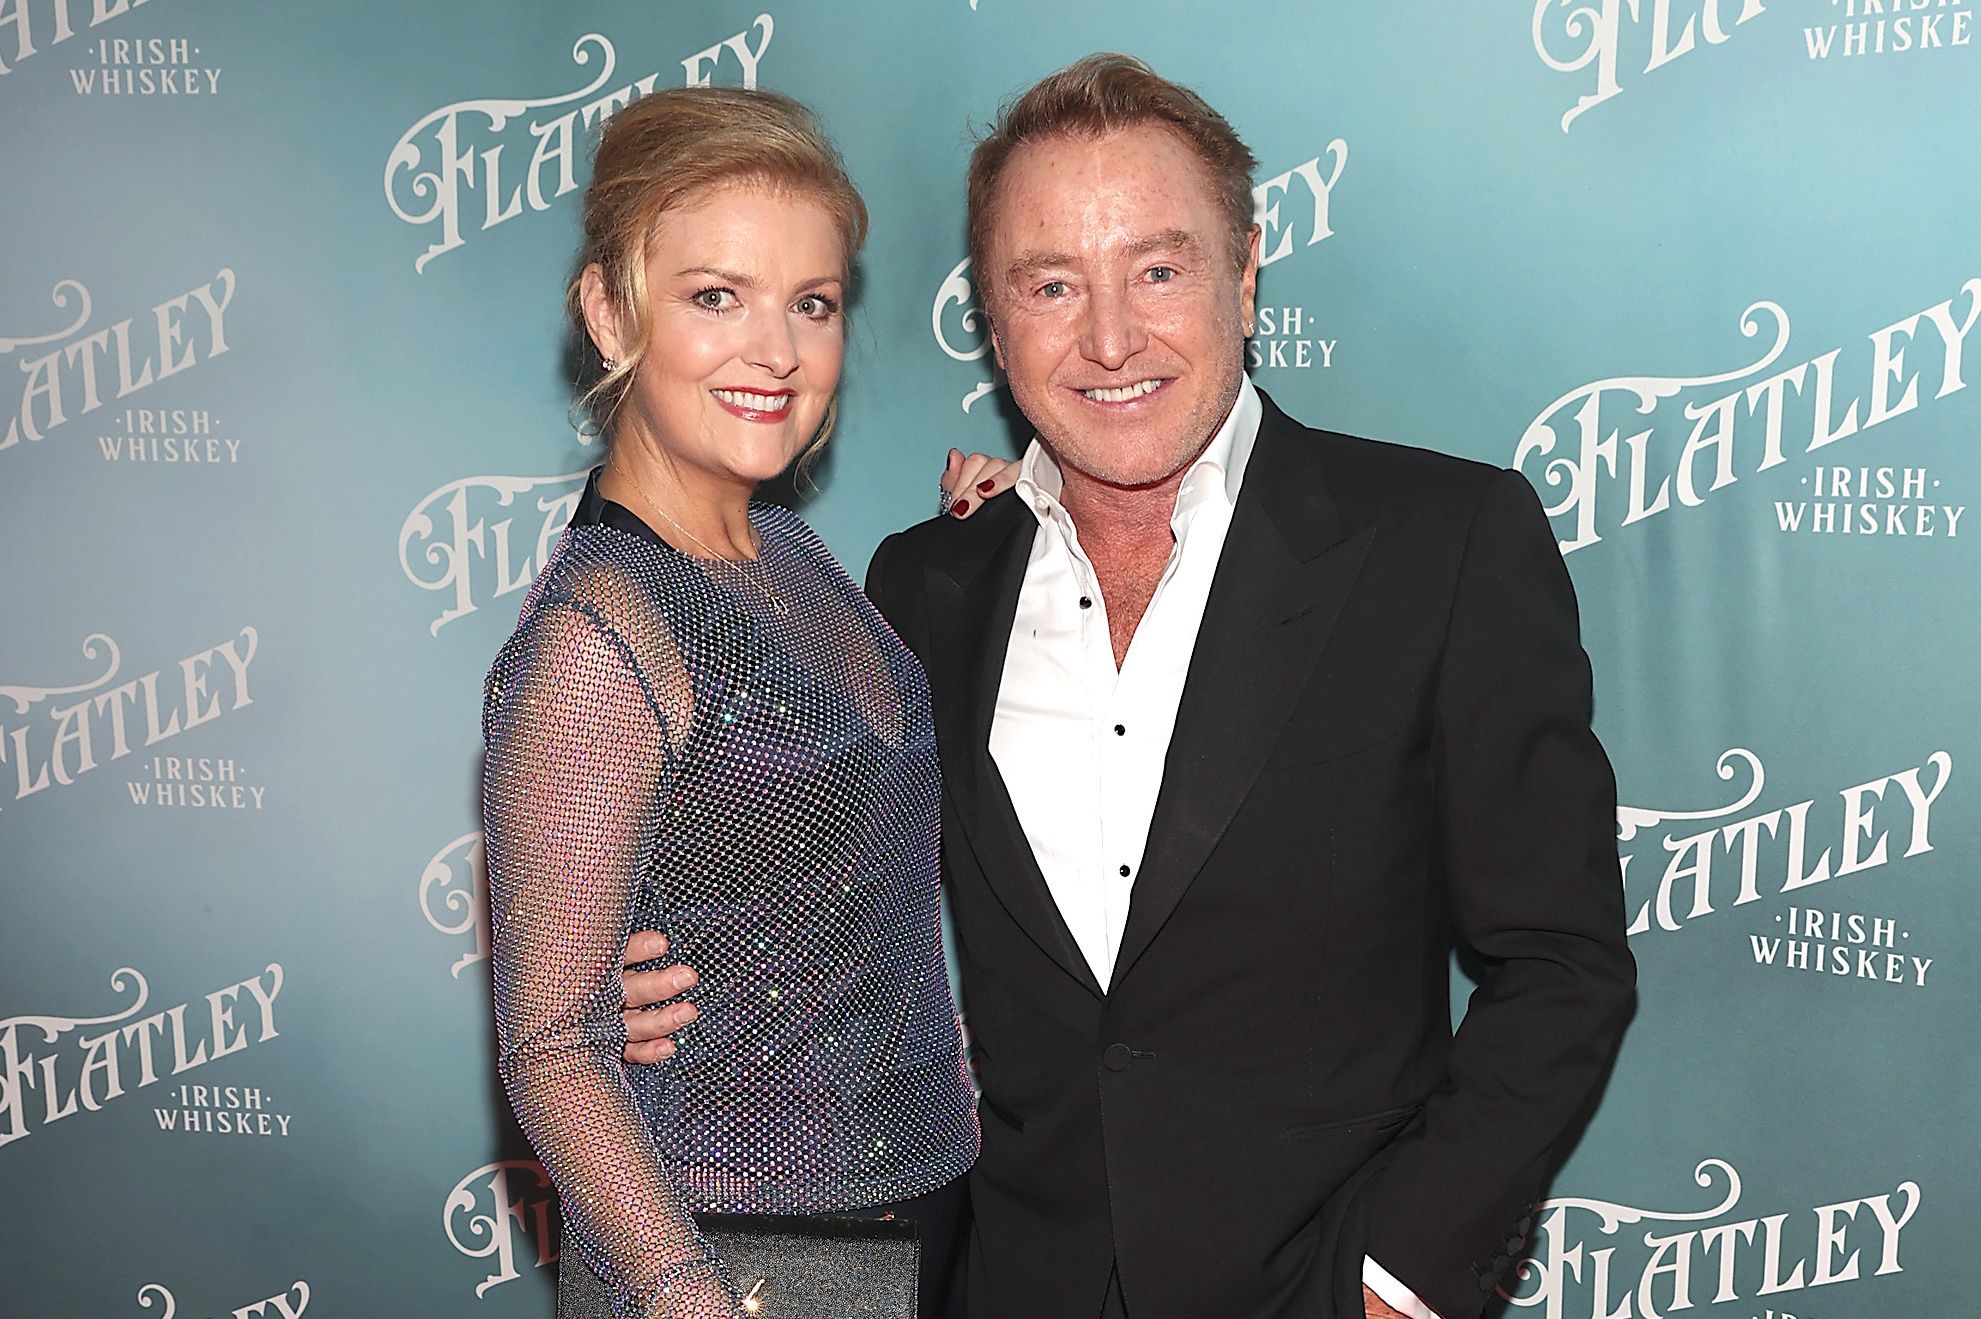 Michael Flatley toasts his roots and Ireland at the launch of Flatley Whiskey